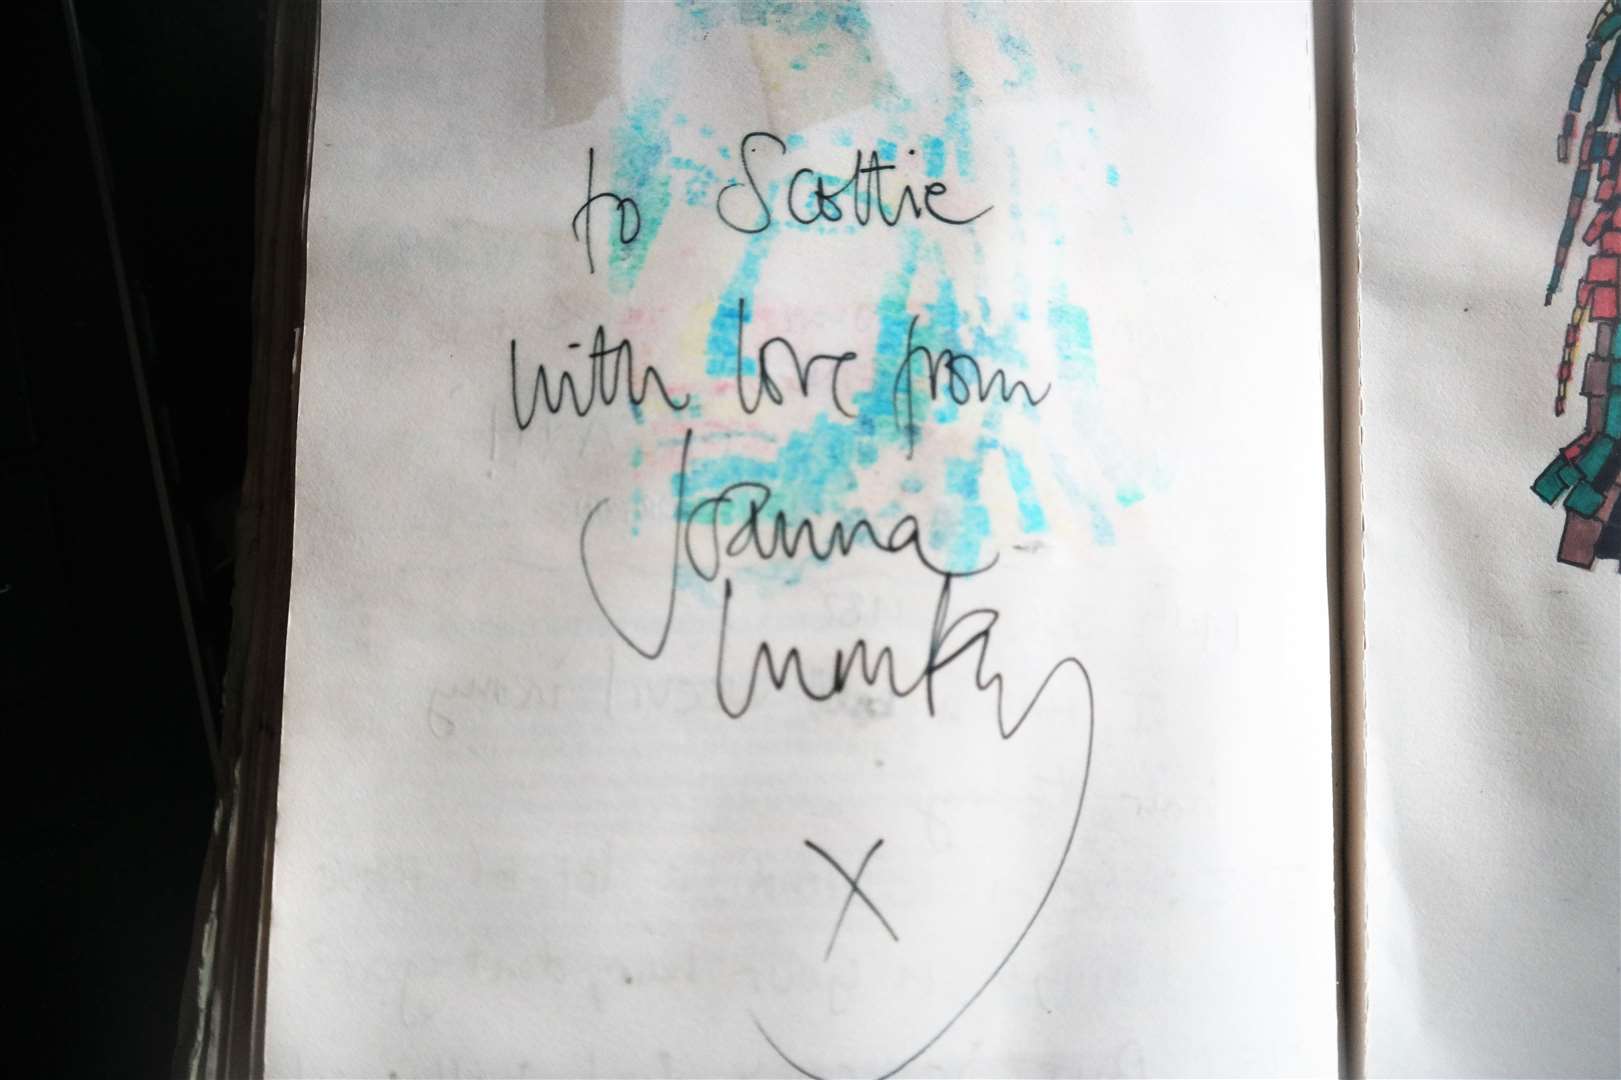 Joanna Lumley's autograph dating from July 1982 when David gatecrashed a vicar's tea party in Canterbury.